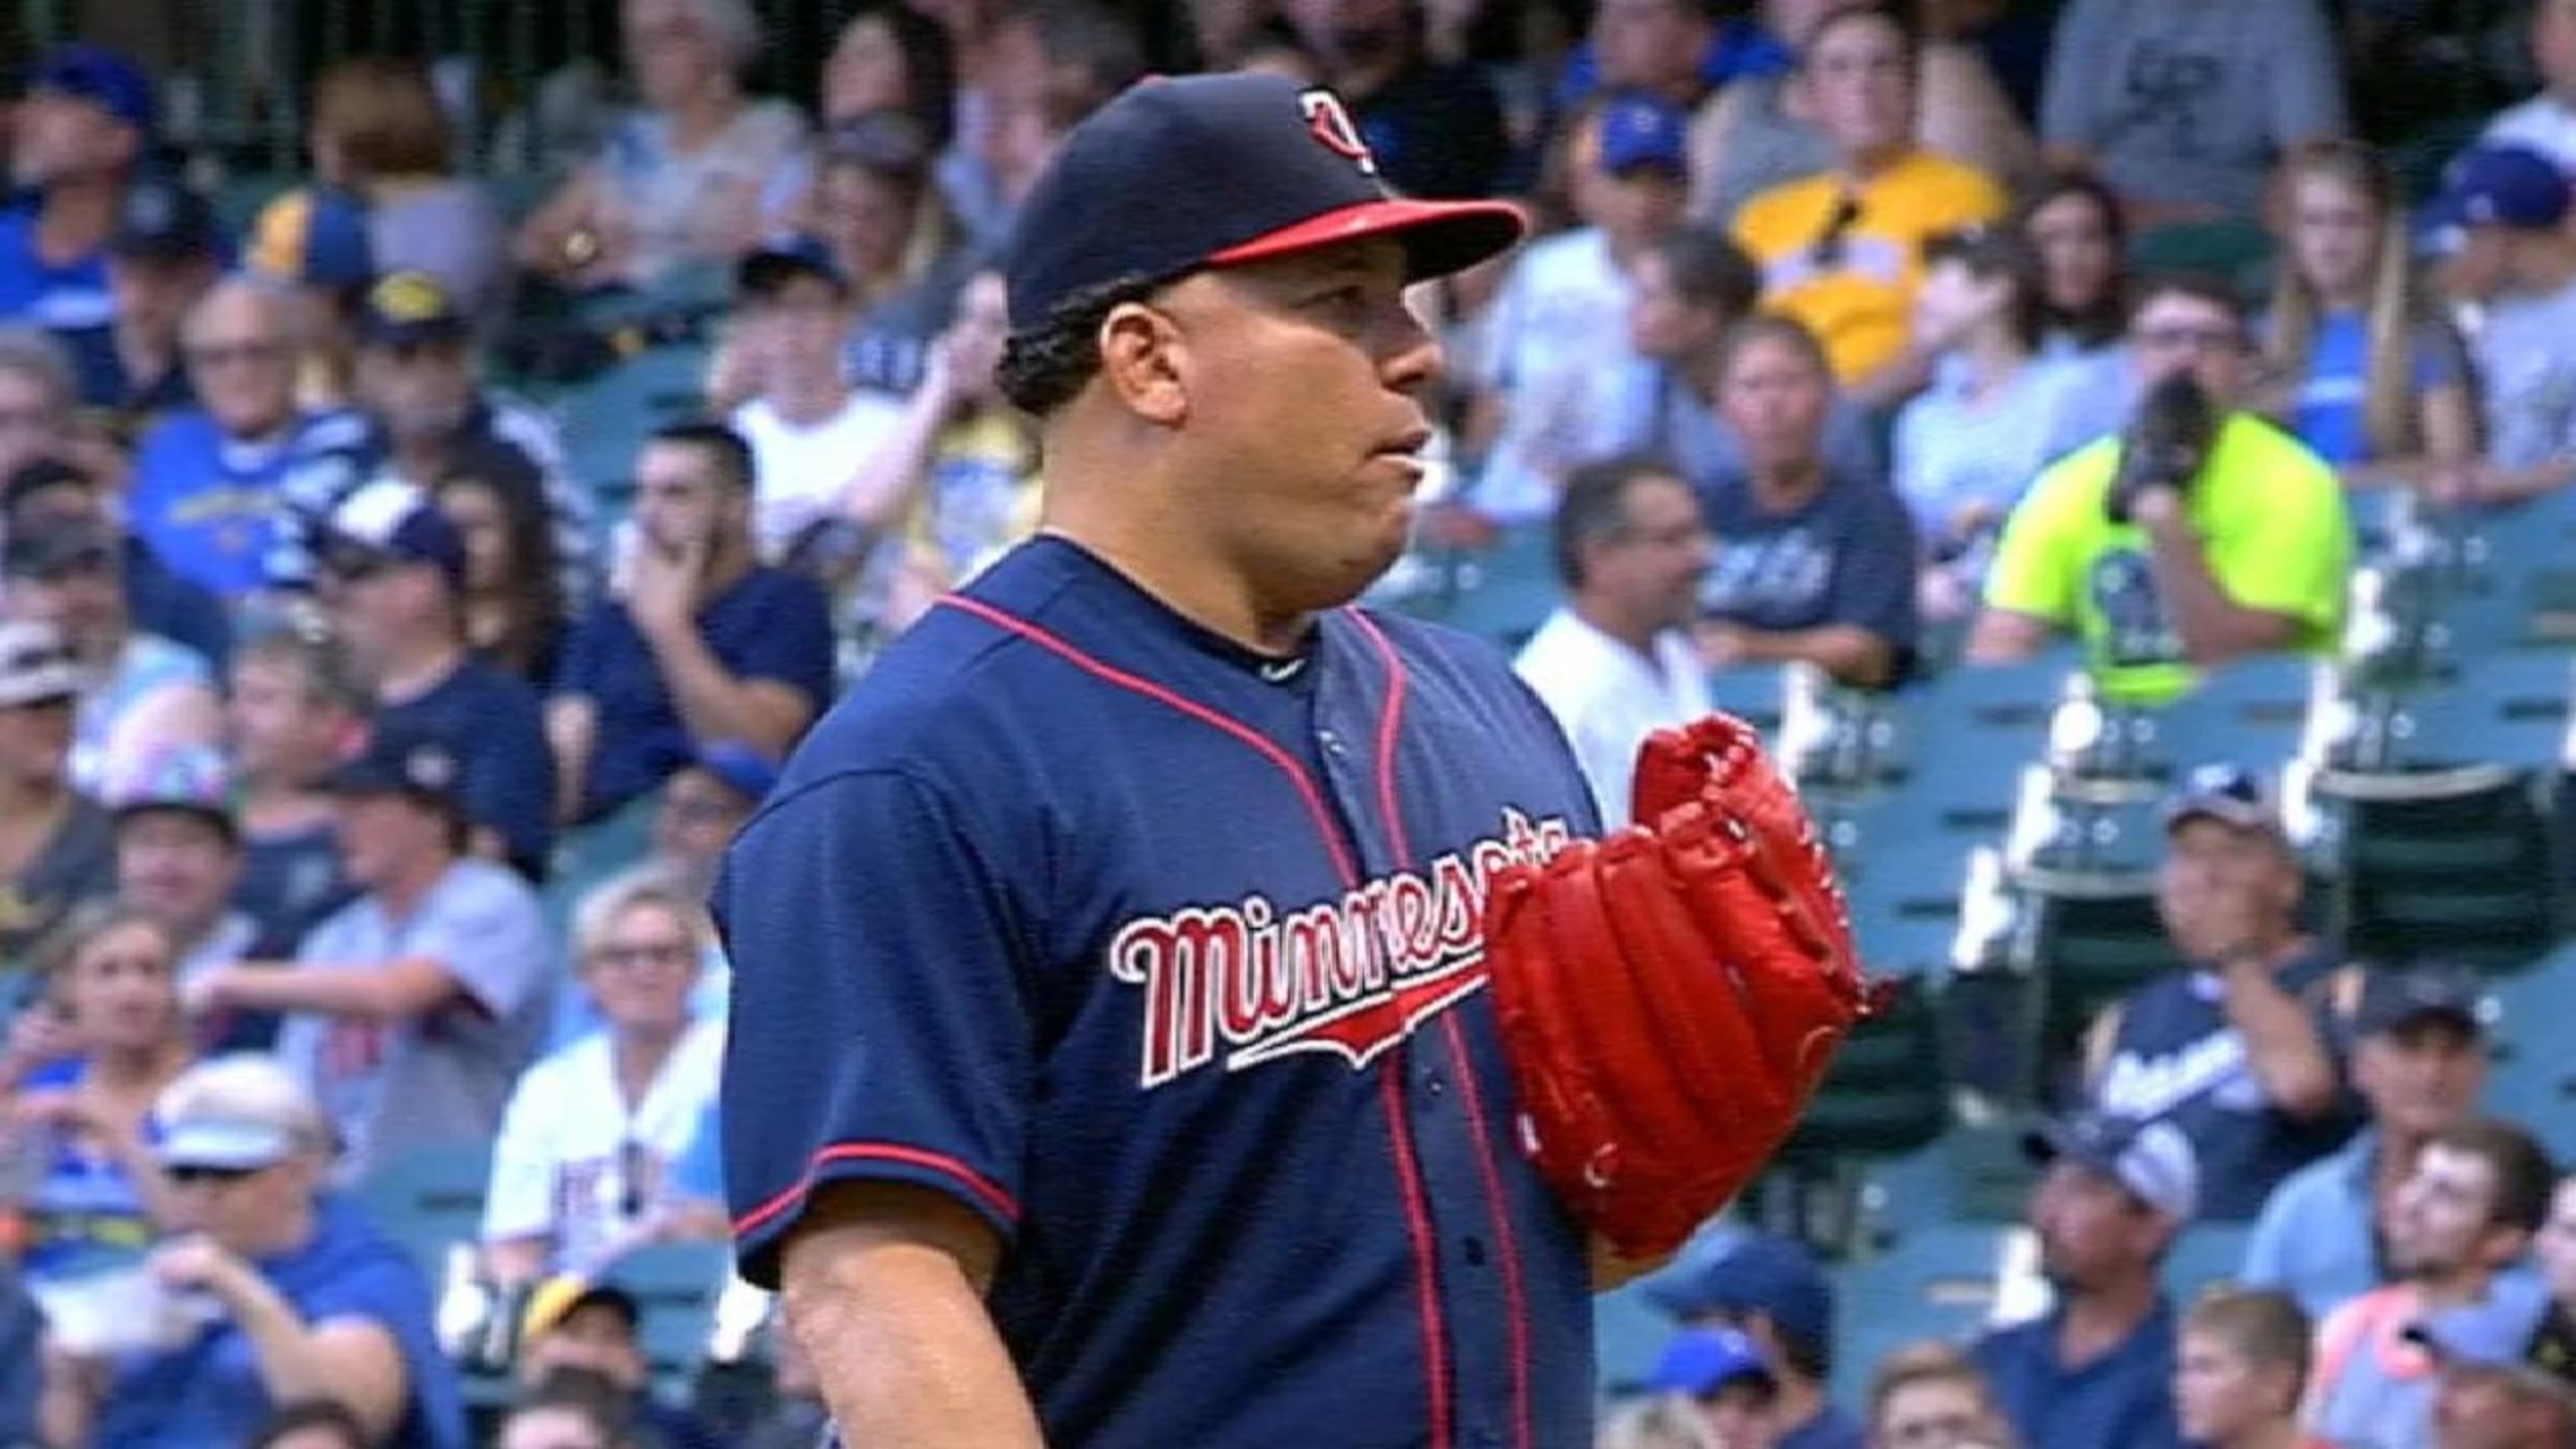 10 players you forgot were Twins